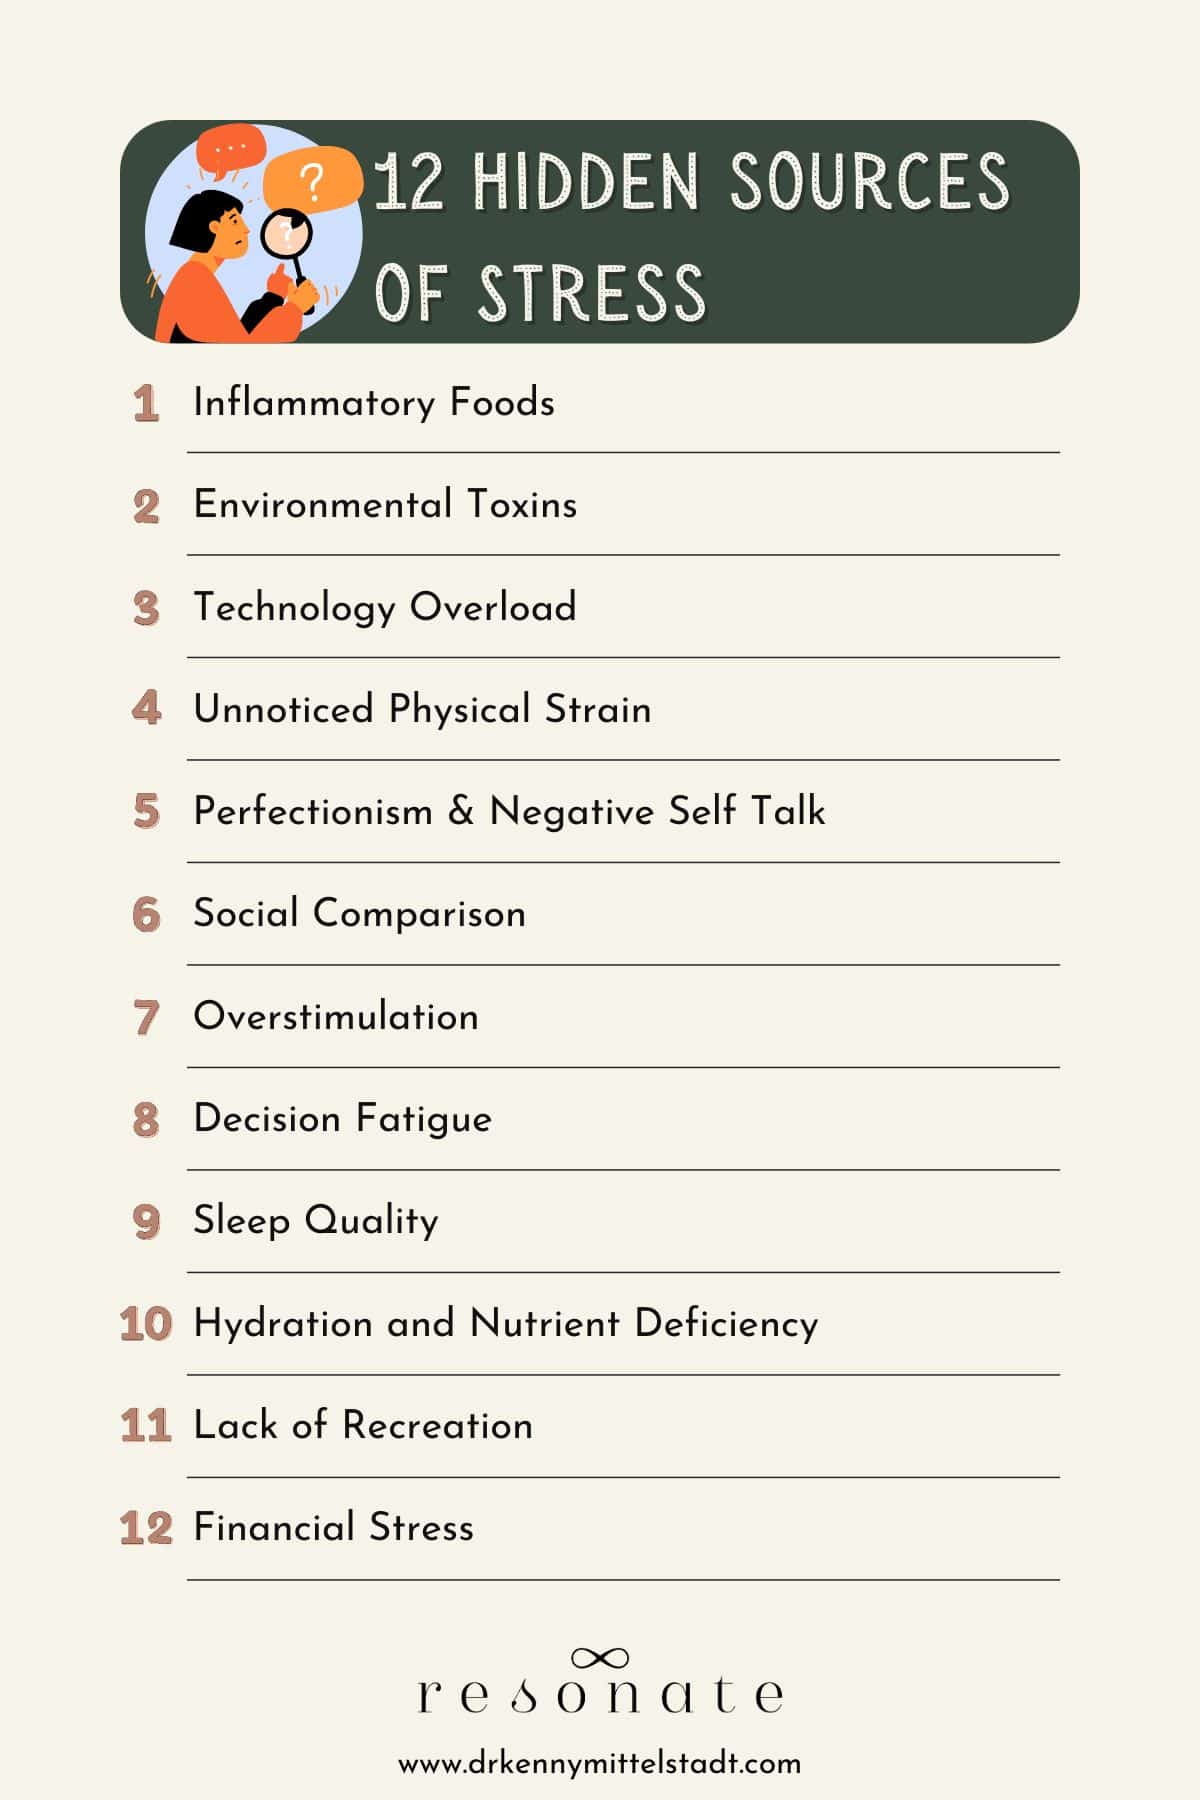 This image lists the 12 Hidden Sources of stress that are being discussed in this blog post